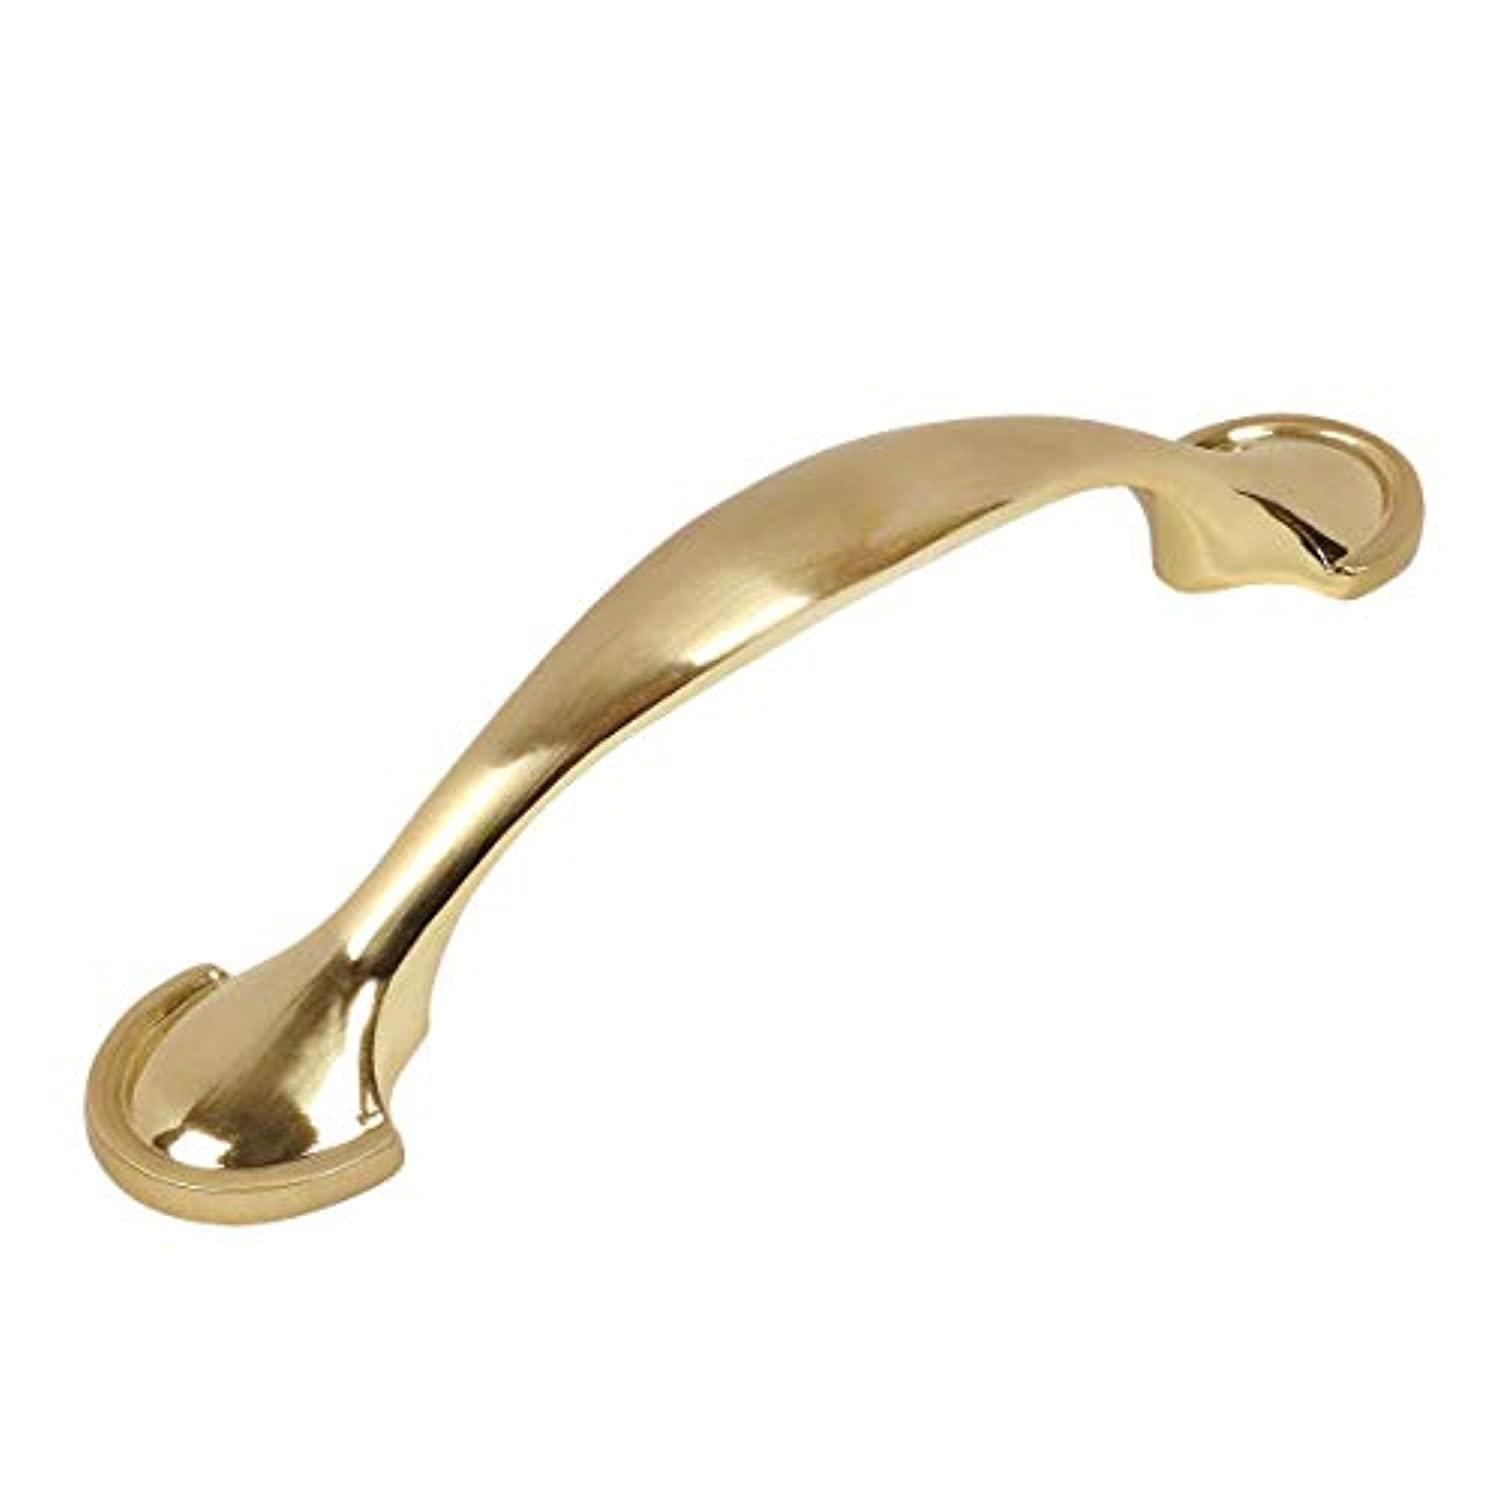 COSMAS 25 pack - cosmas 6632bb brushed brass cabinet hardware handle pull - 3" inch (76mm) hole centers